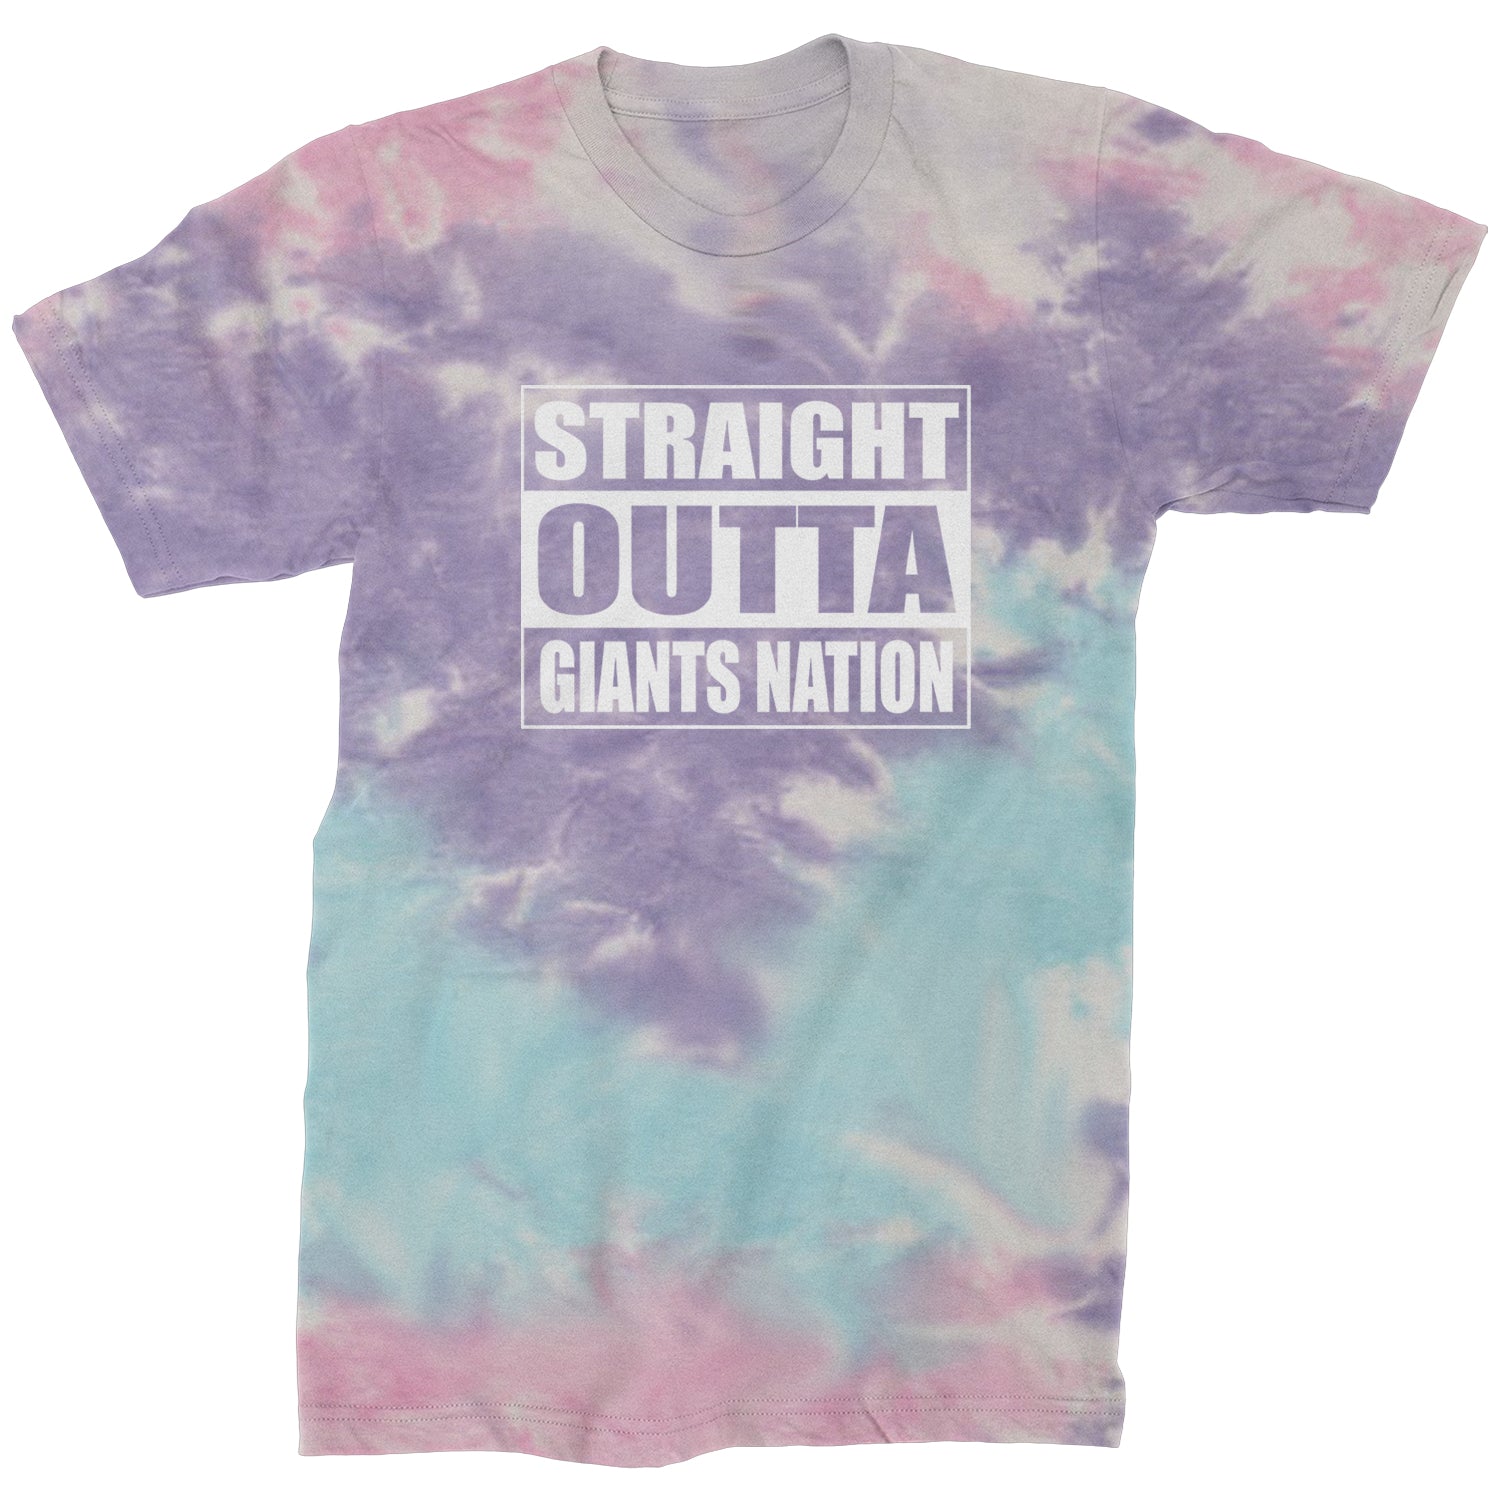 Straight Outta Giants Nation Mens T-shirt bleed, blue, football, giants, new, ny, york by Expression Tees